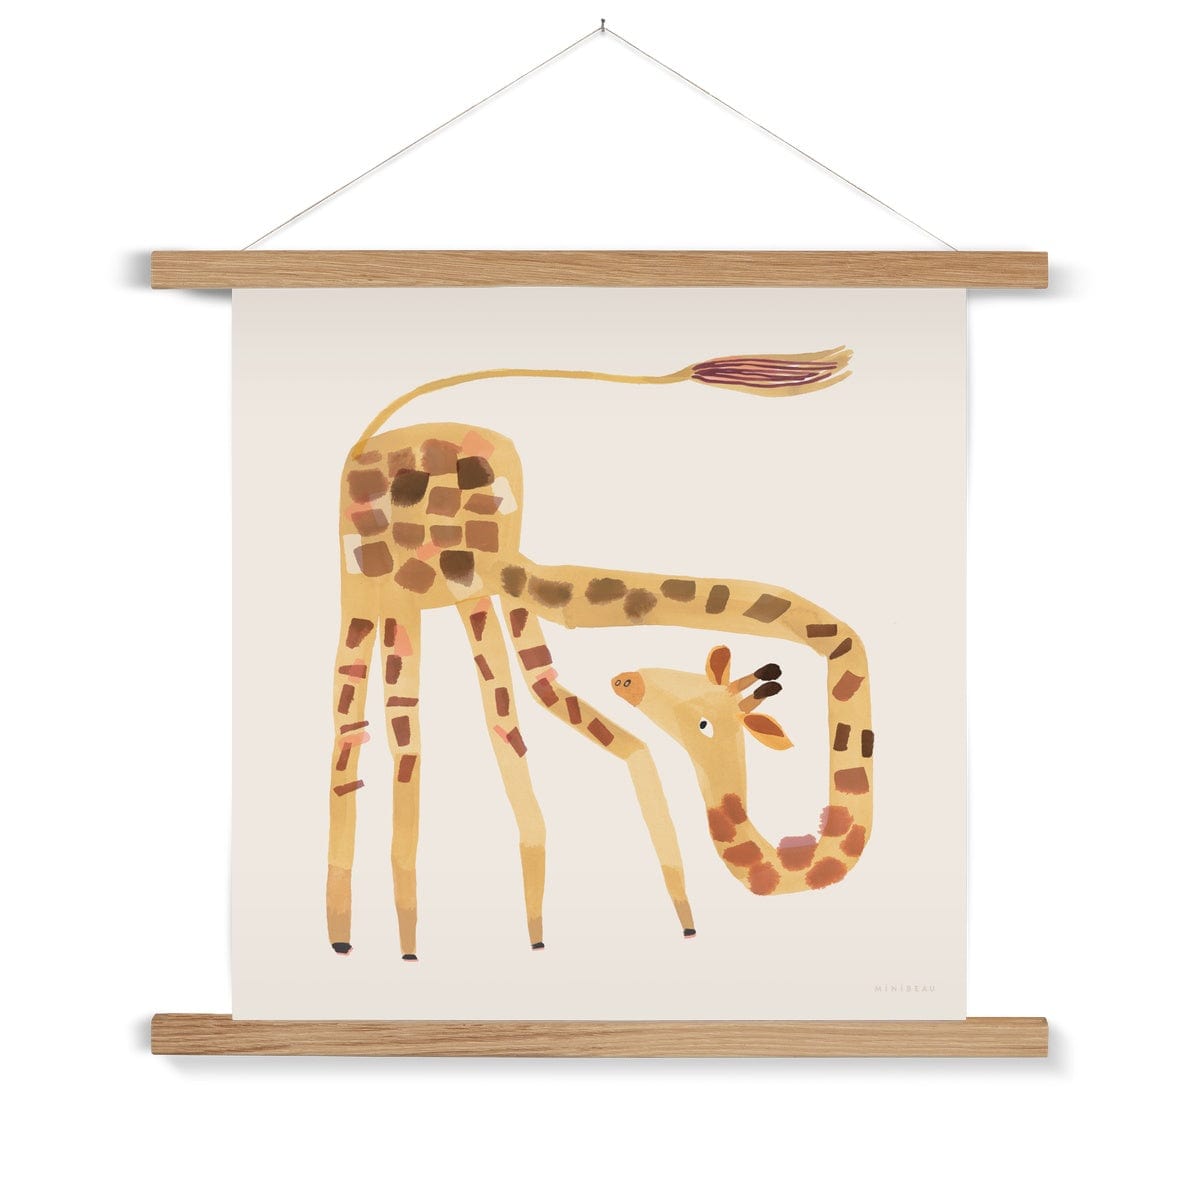 Art print in a natural wood hanger. Our square Giraffe art print shows a cartoon giraffe with it's tail in the air and it's bending neck looking round its shoulders on a neutral background.